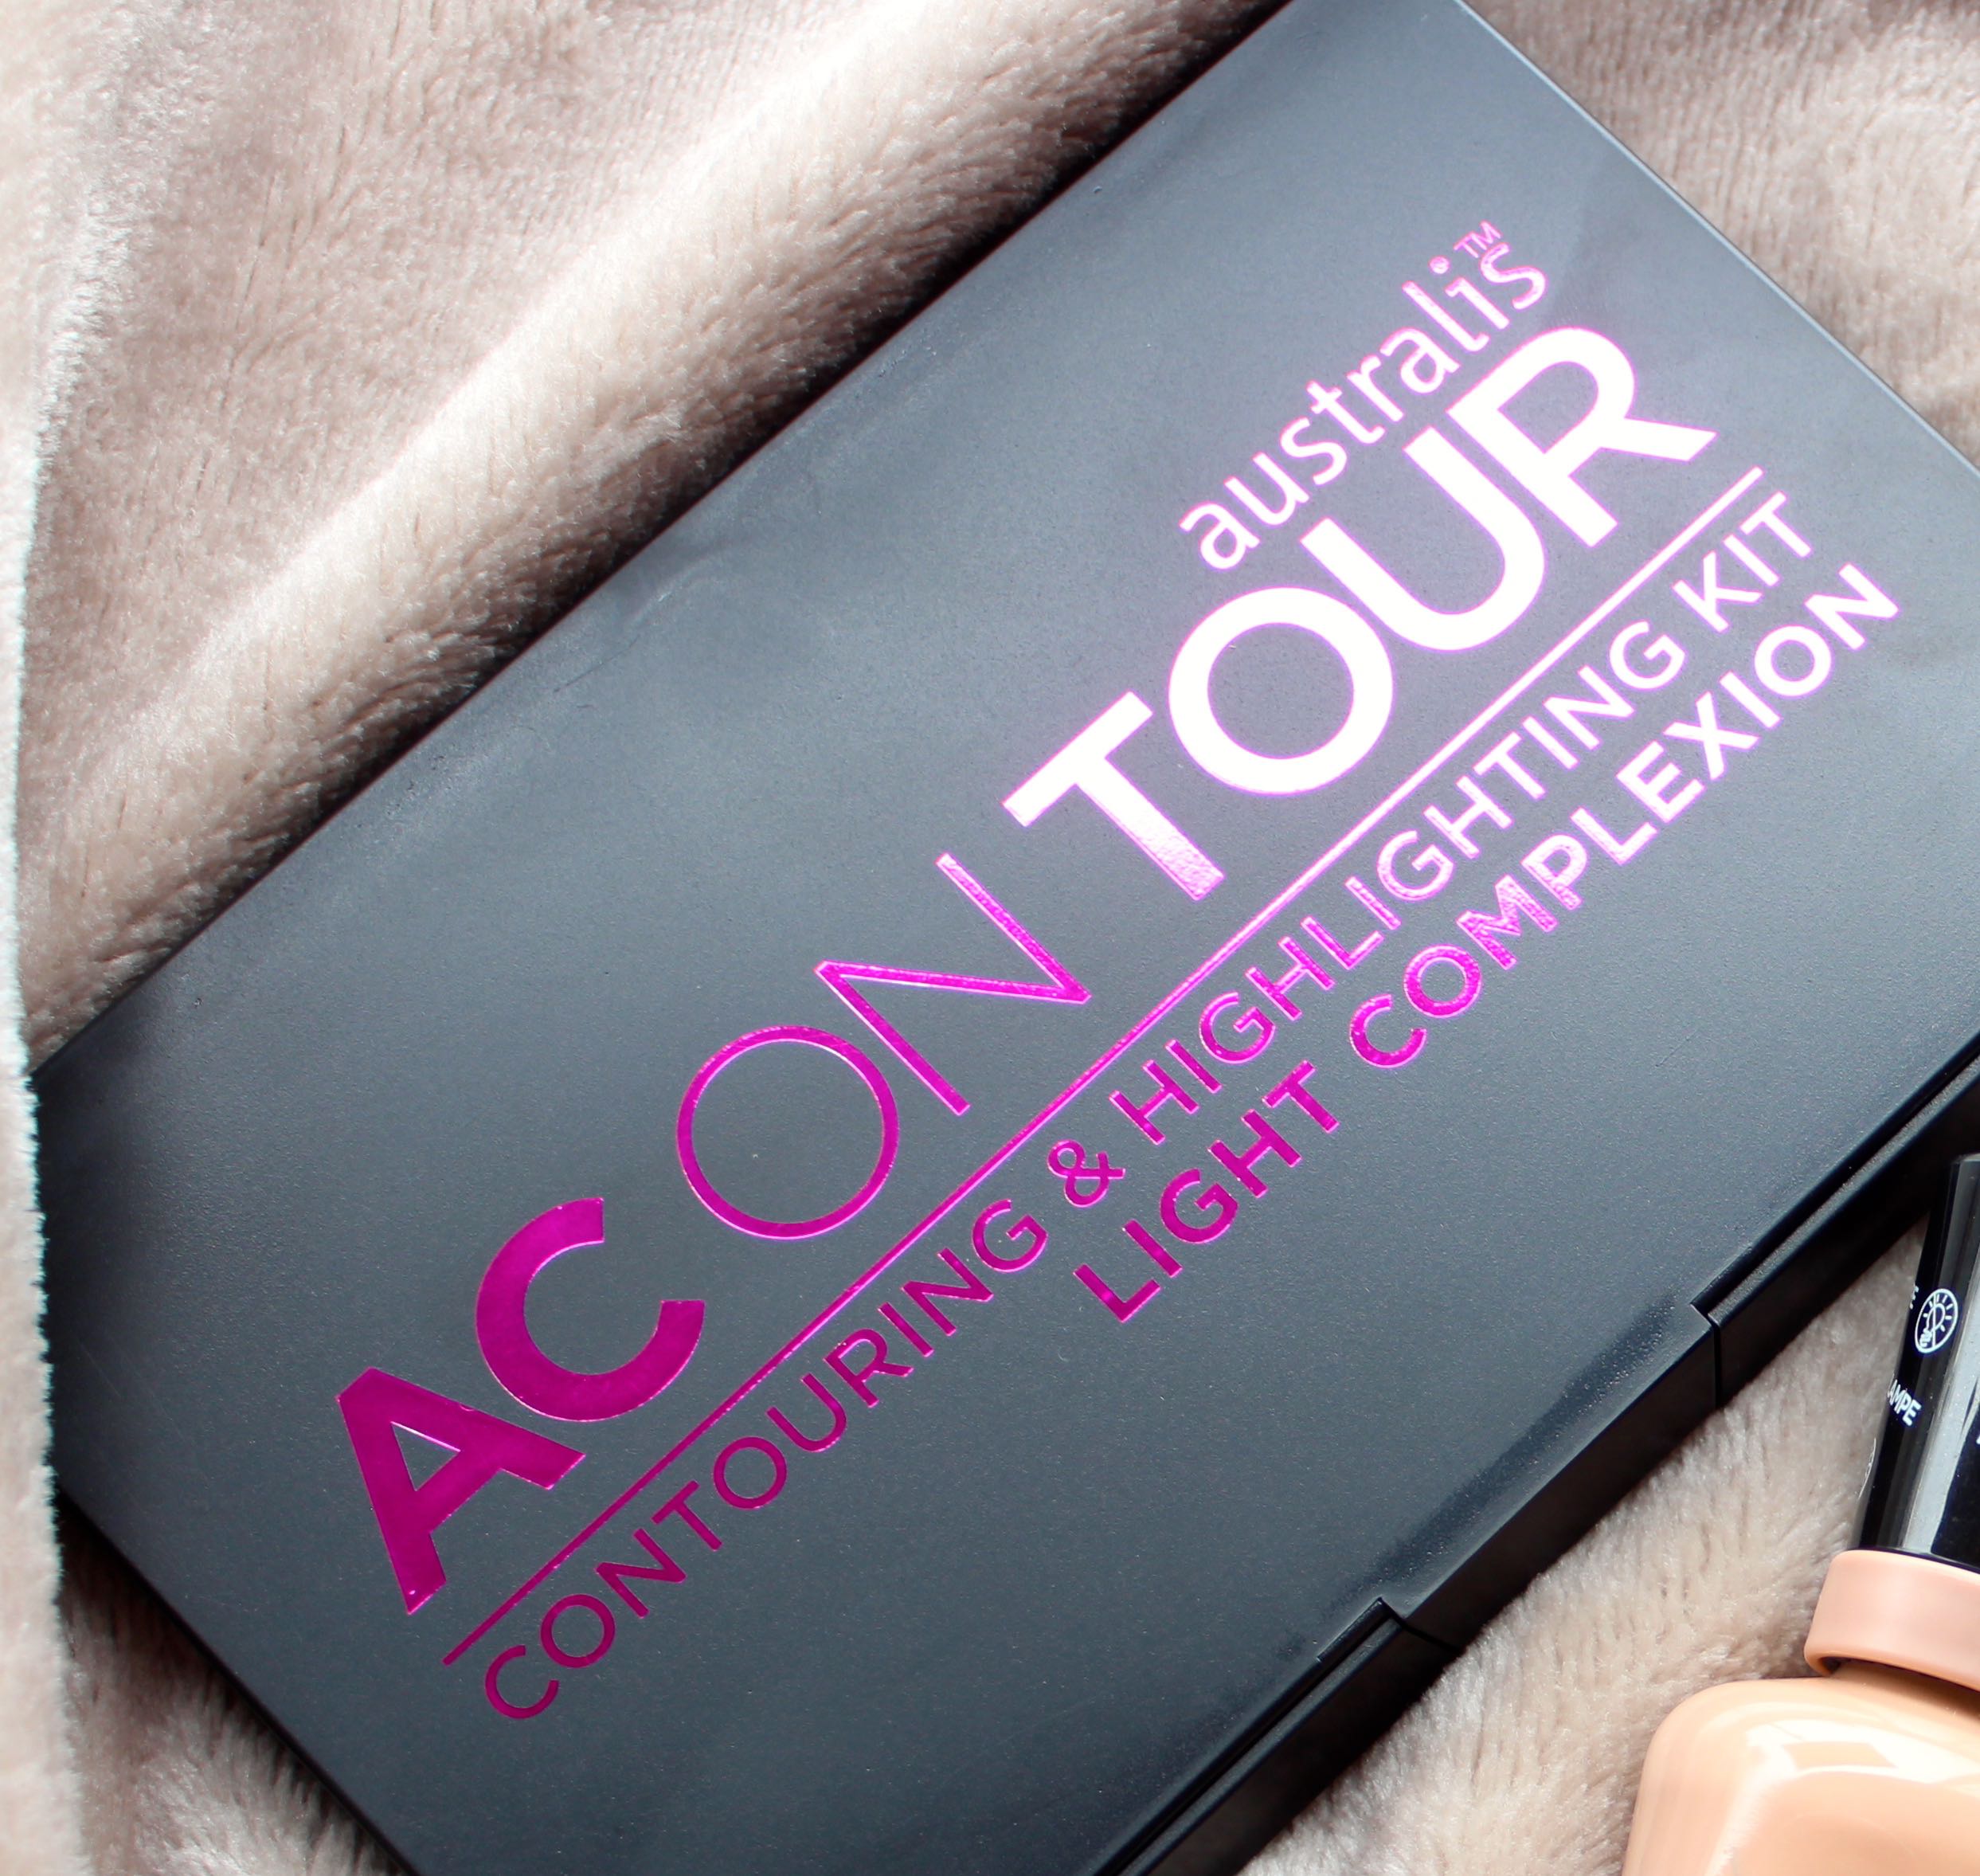 Australis AC on Tour Contour & Highlight Kit Review by Facemadeup